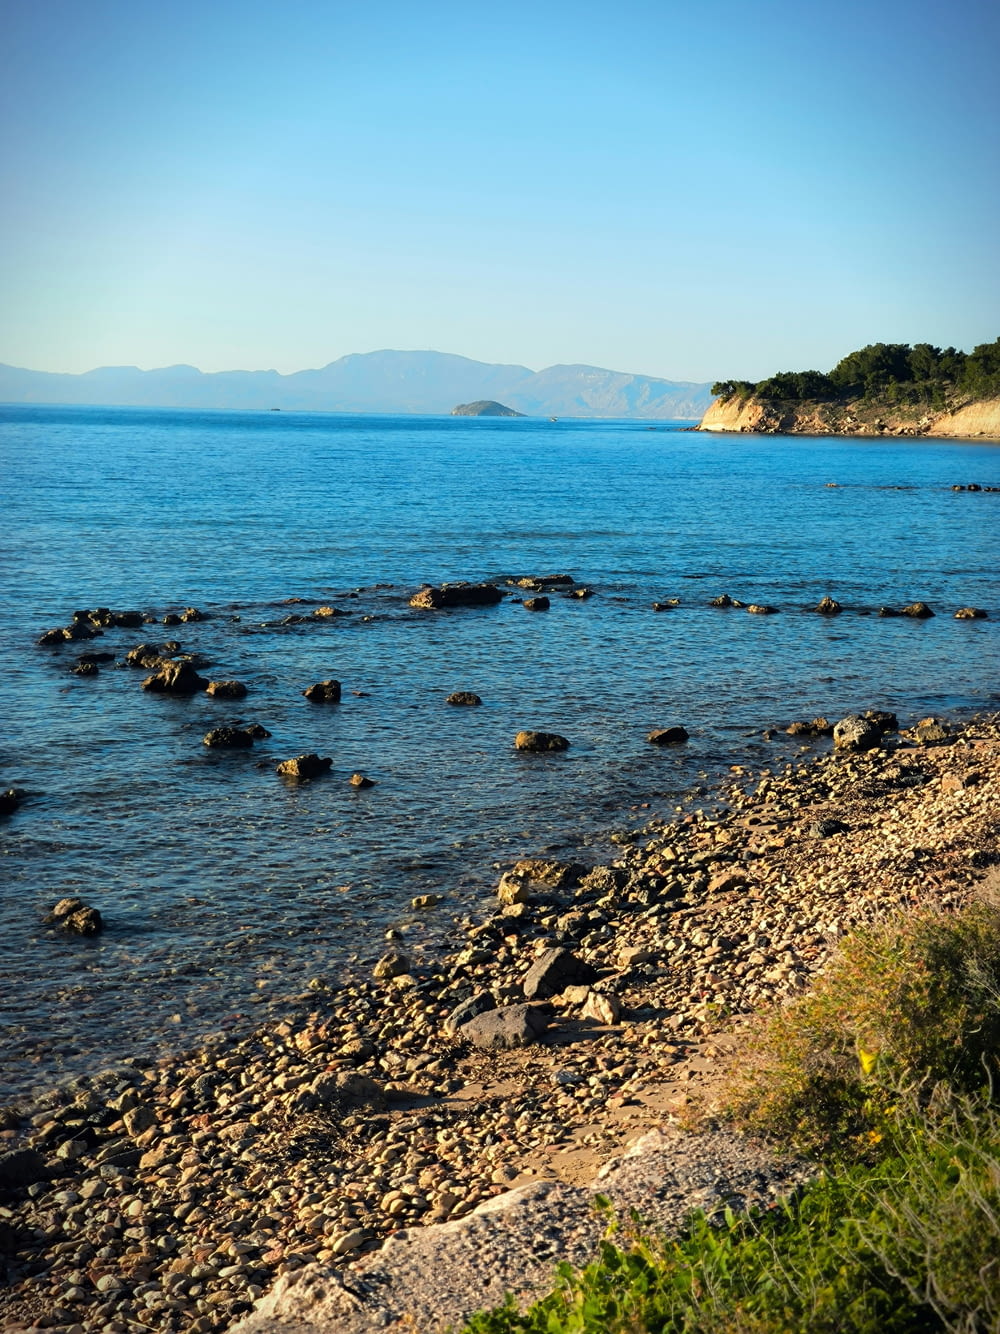 a rocky shore line with a body of water and mountains in the distance